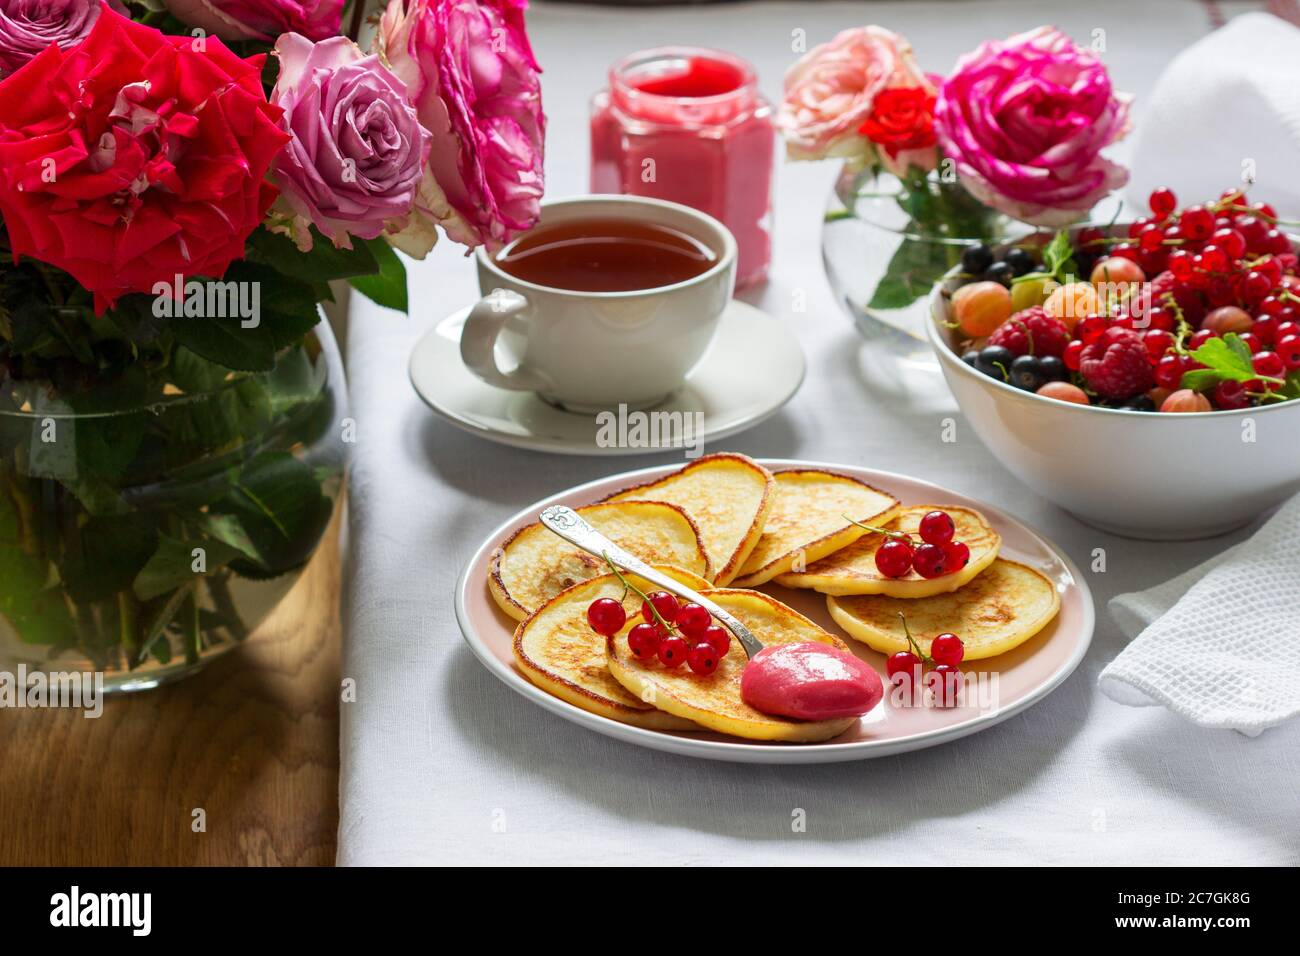 Curd pancakes with berry curd served with tea on a table decorated with bouquets of roses. Stock Photo